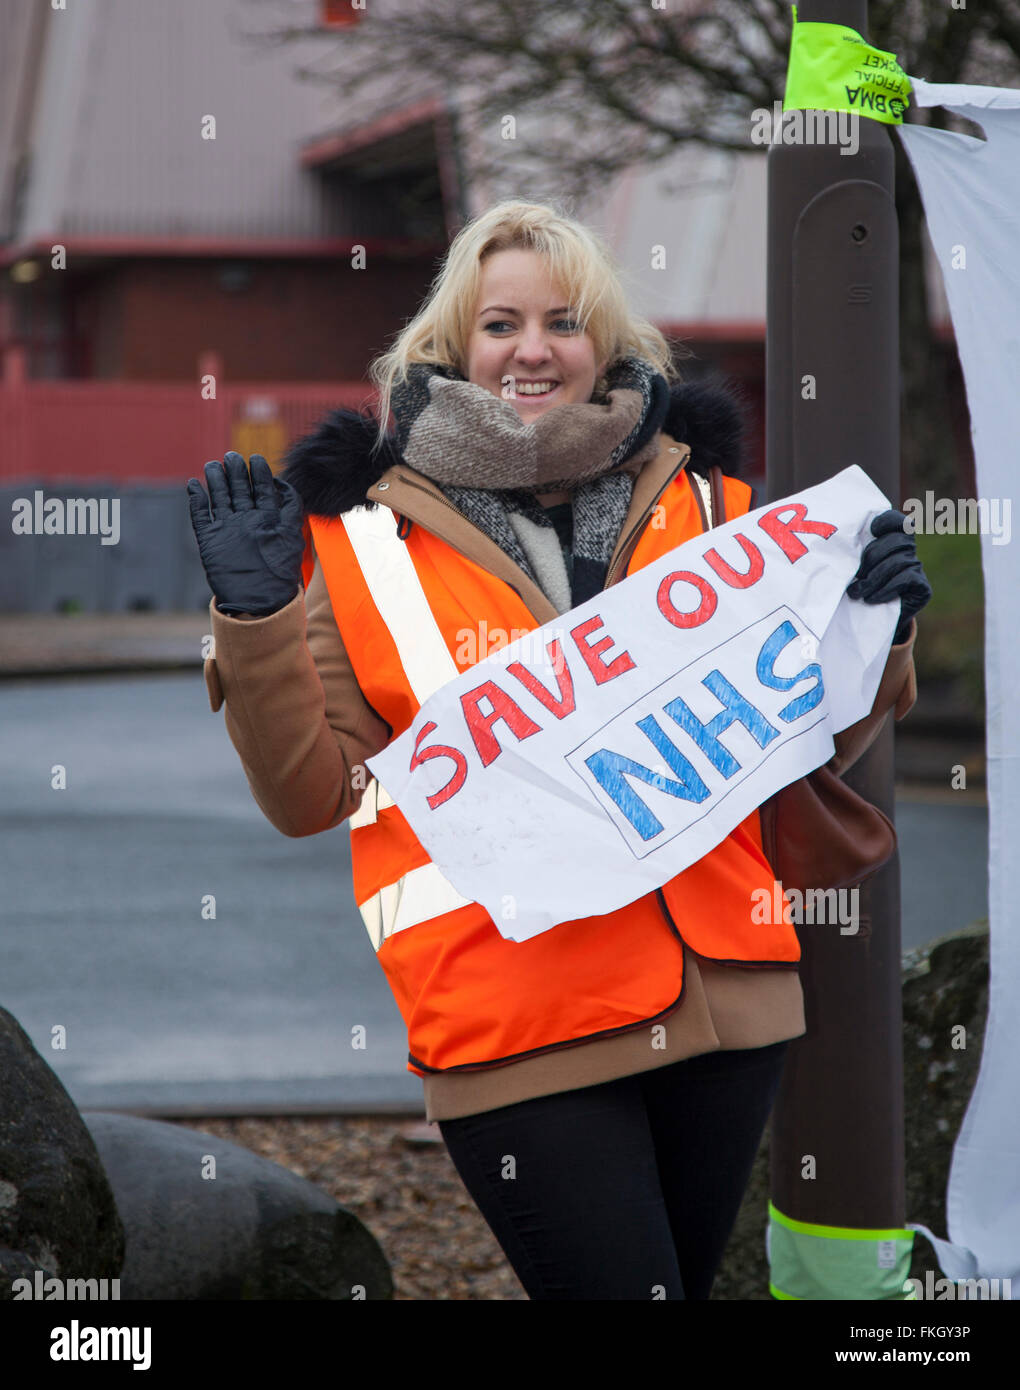 Southport, Merseyside, UK 9th March, 2016.  Tracey Smith and others, who have completed a 13 hours shift at the Southport and Formby District General Hospital, Town Lane, Kew, protest against the imposition of new junior doctors contracts.  The third strike by junior doctors in their contract row with the government in England is under way.  The action began at 08:00 GMT is scheduled to last 48 hours - the longest one so far - but medics are once again providing emergency cover in hospitals. Stock Photo